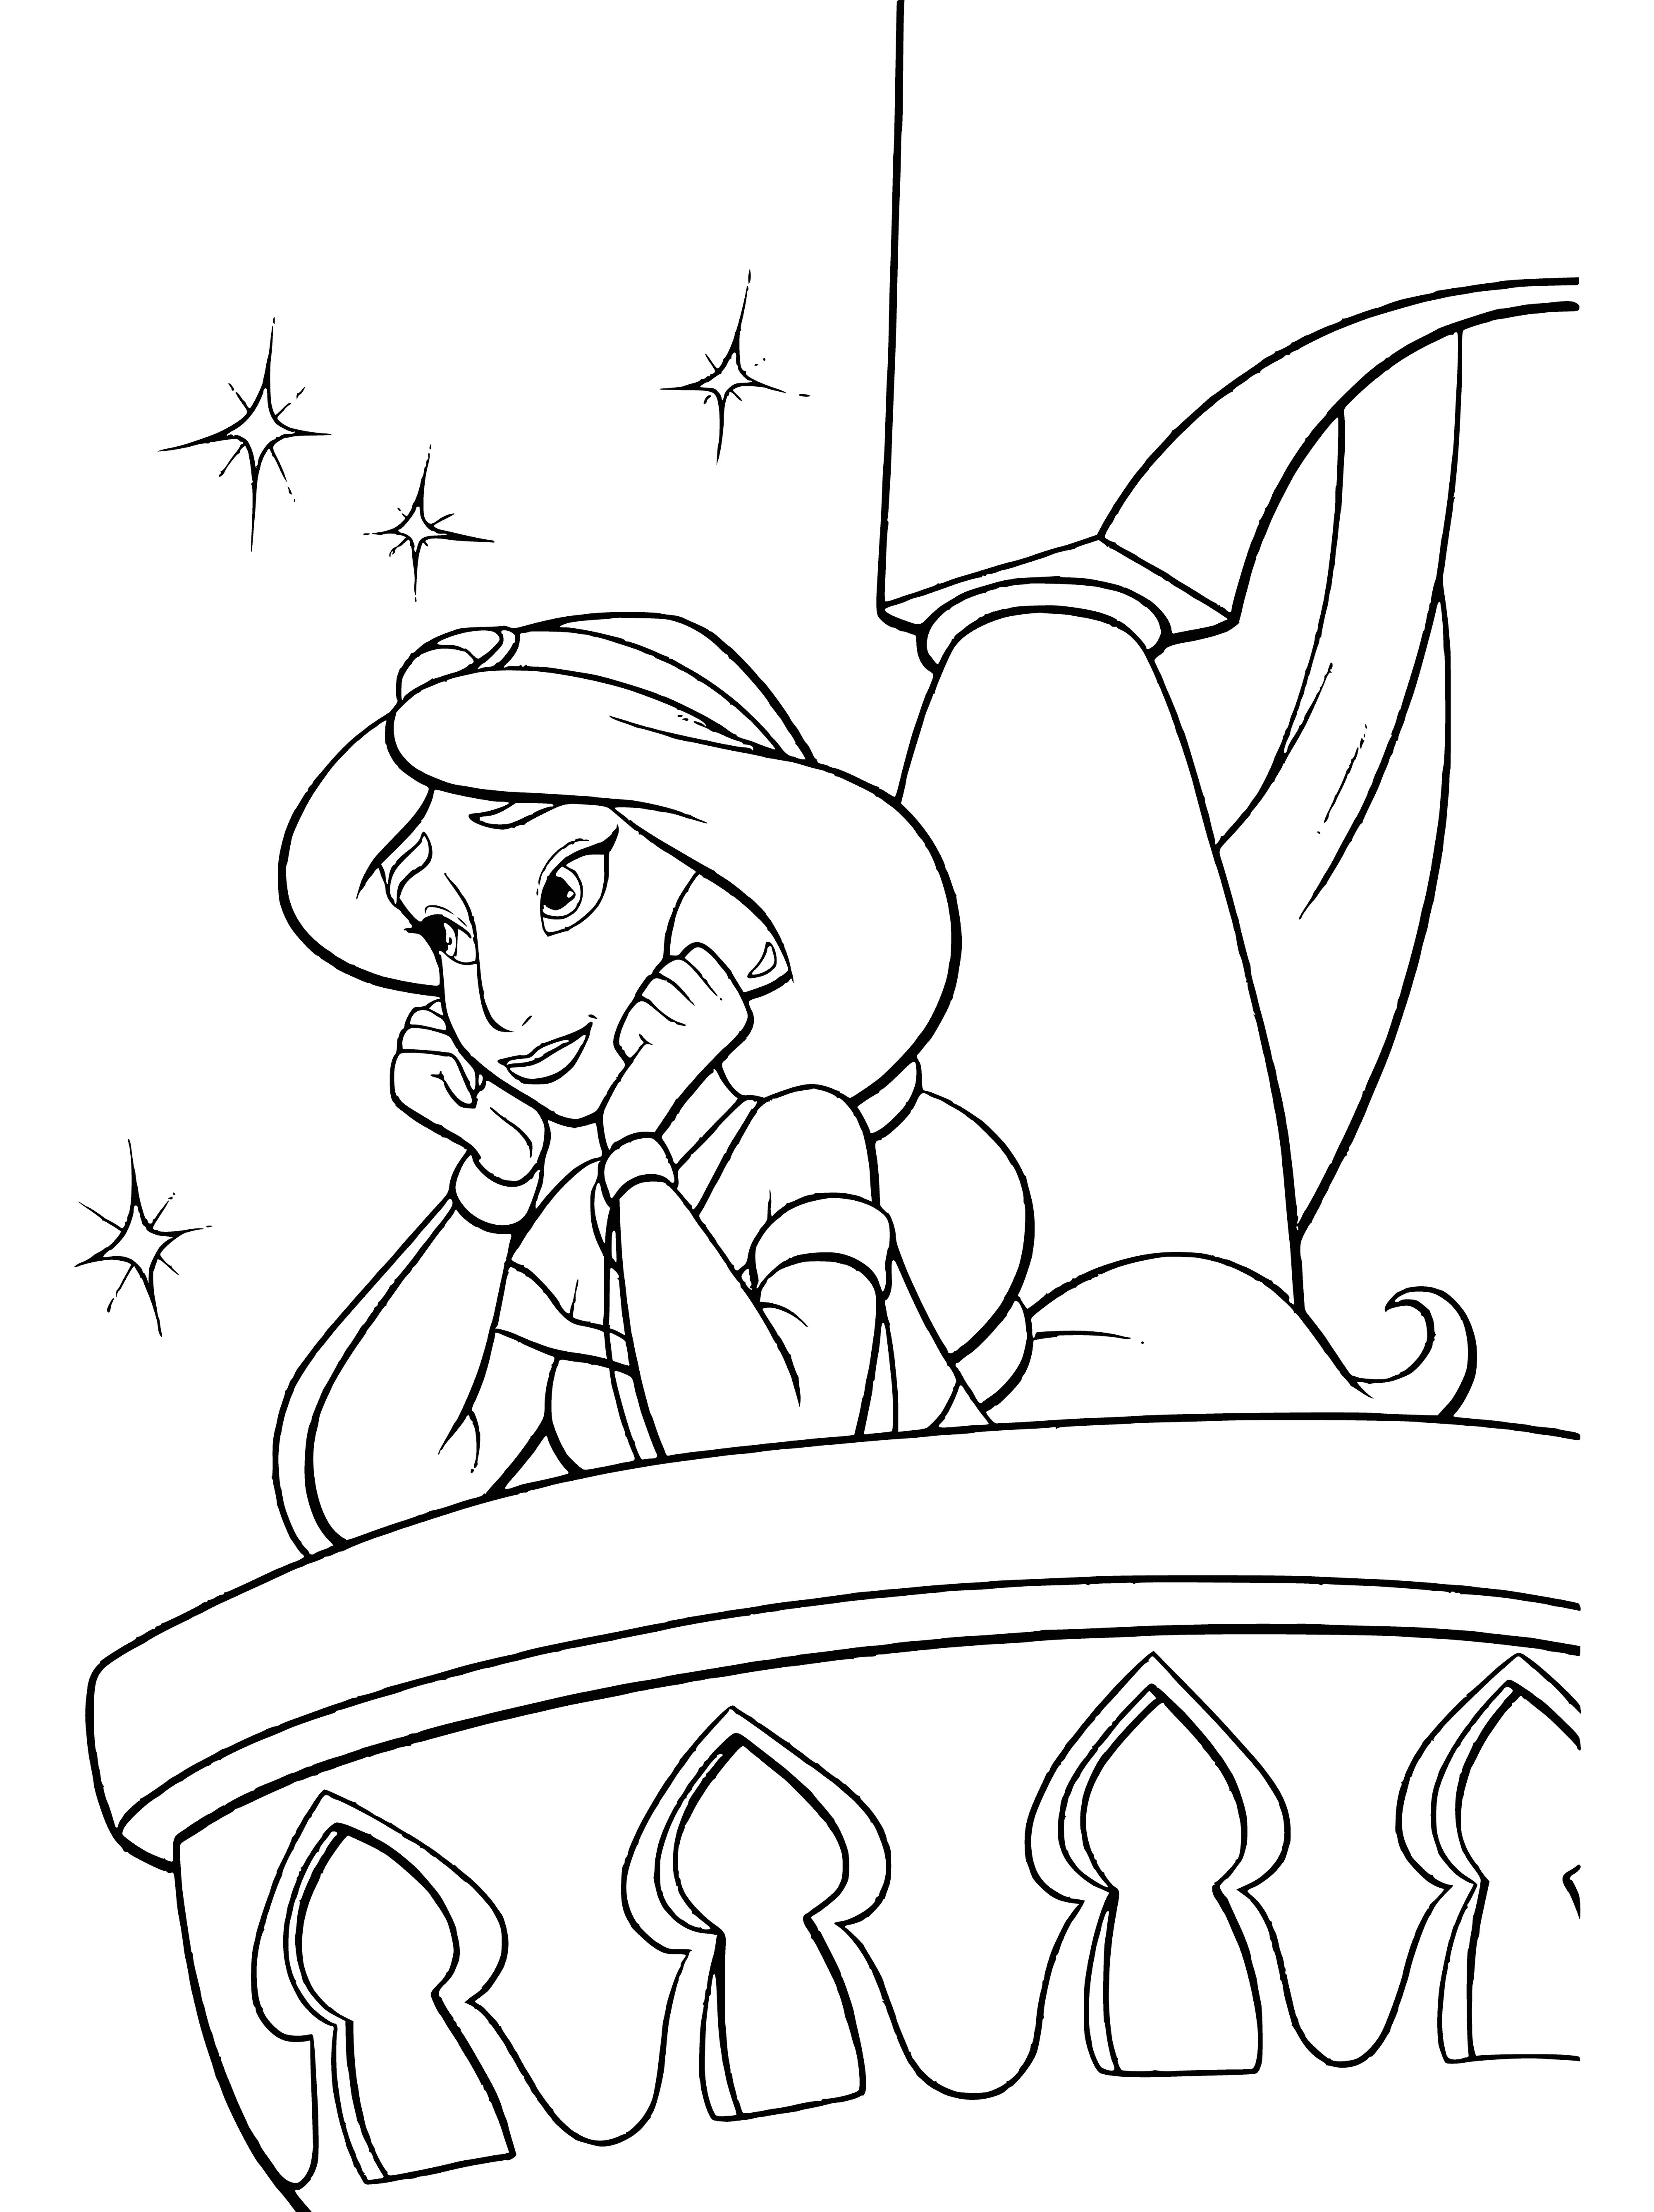 Jasmine on the balcony coloring page